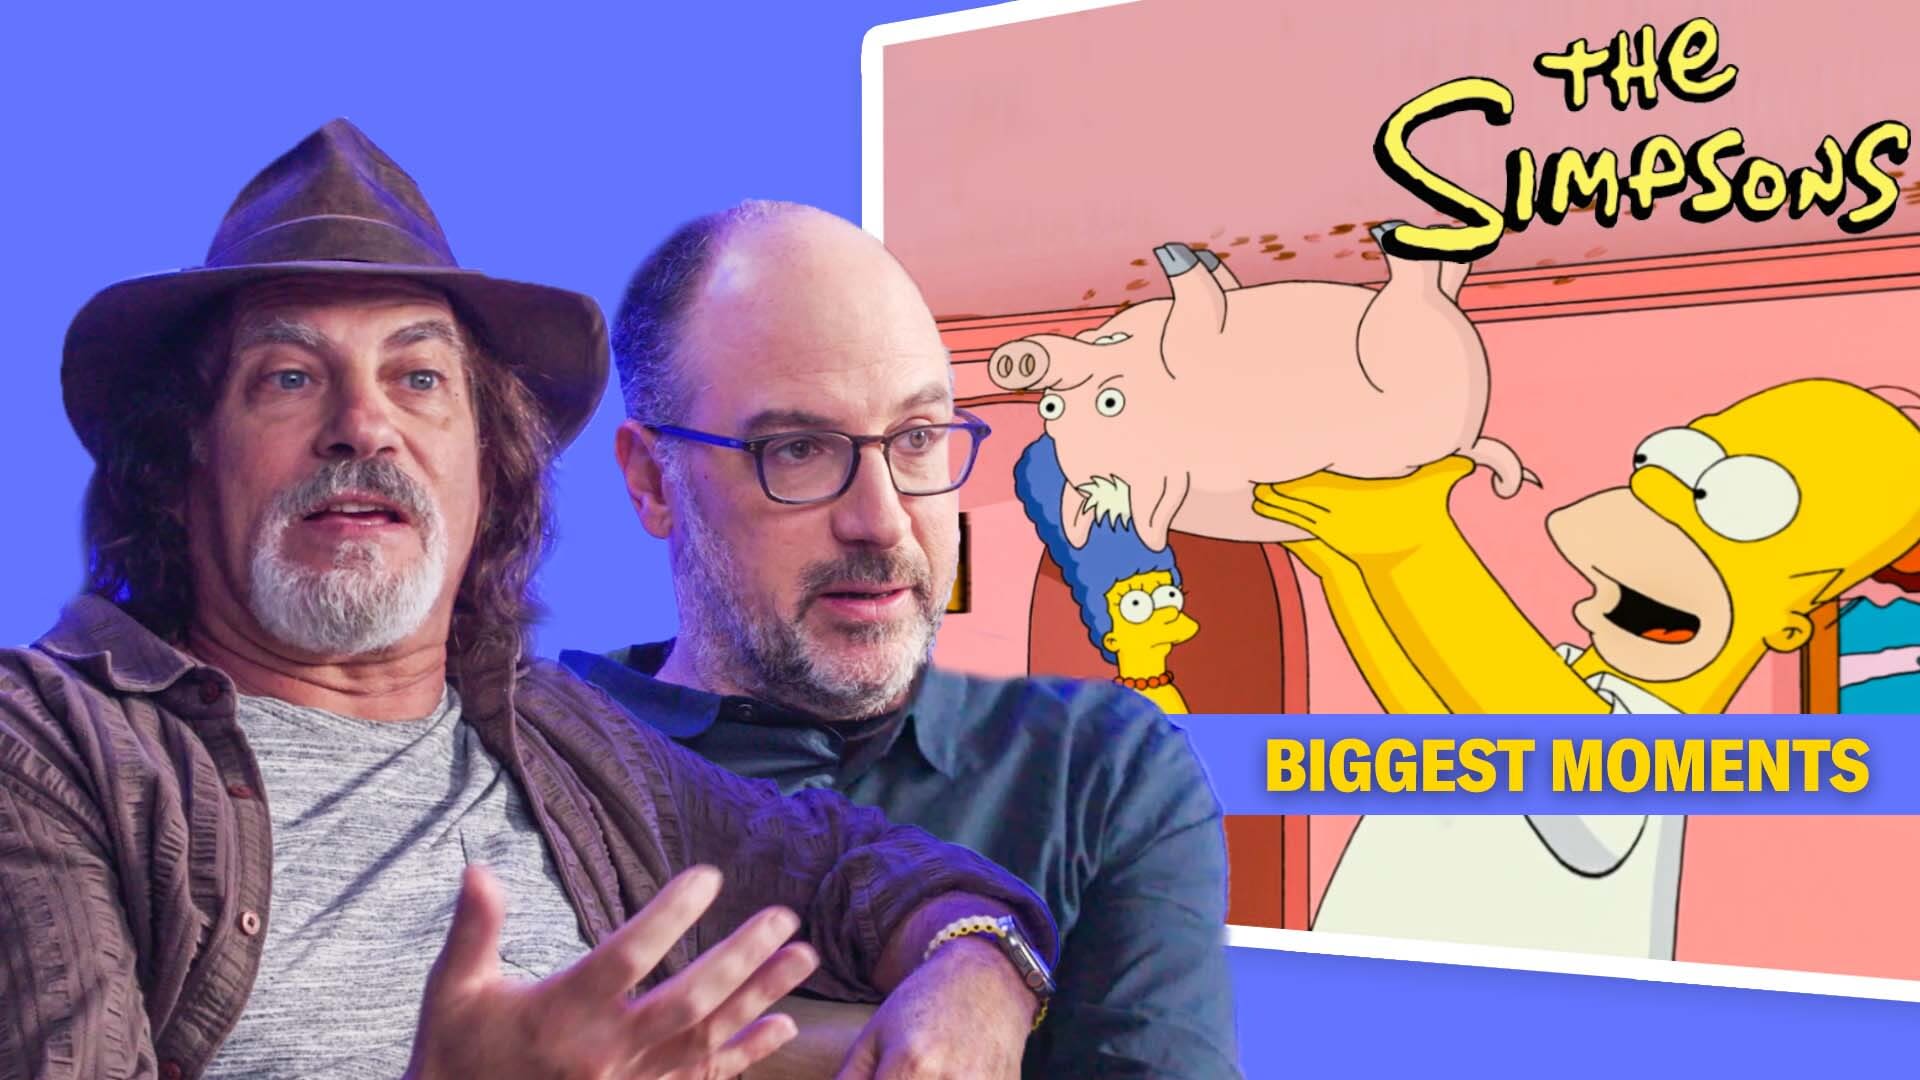 Watch 'The Simpsons' Producers Break Down The Show's Biggest Moments |  Biggest Moments | GQ